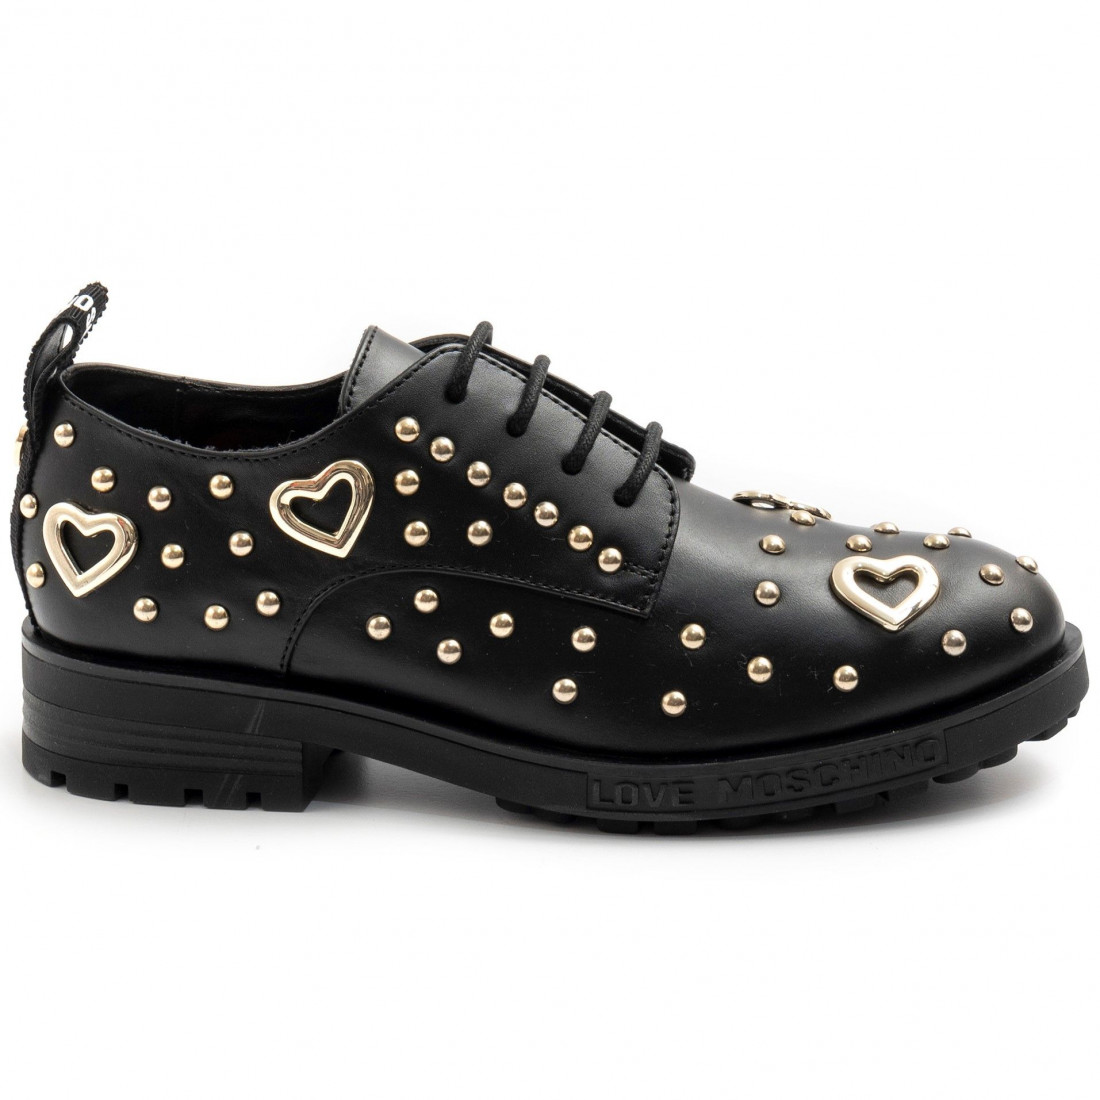 love moschino shoes